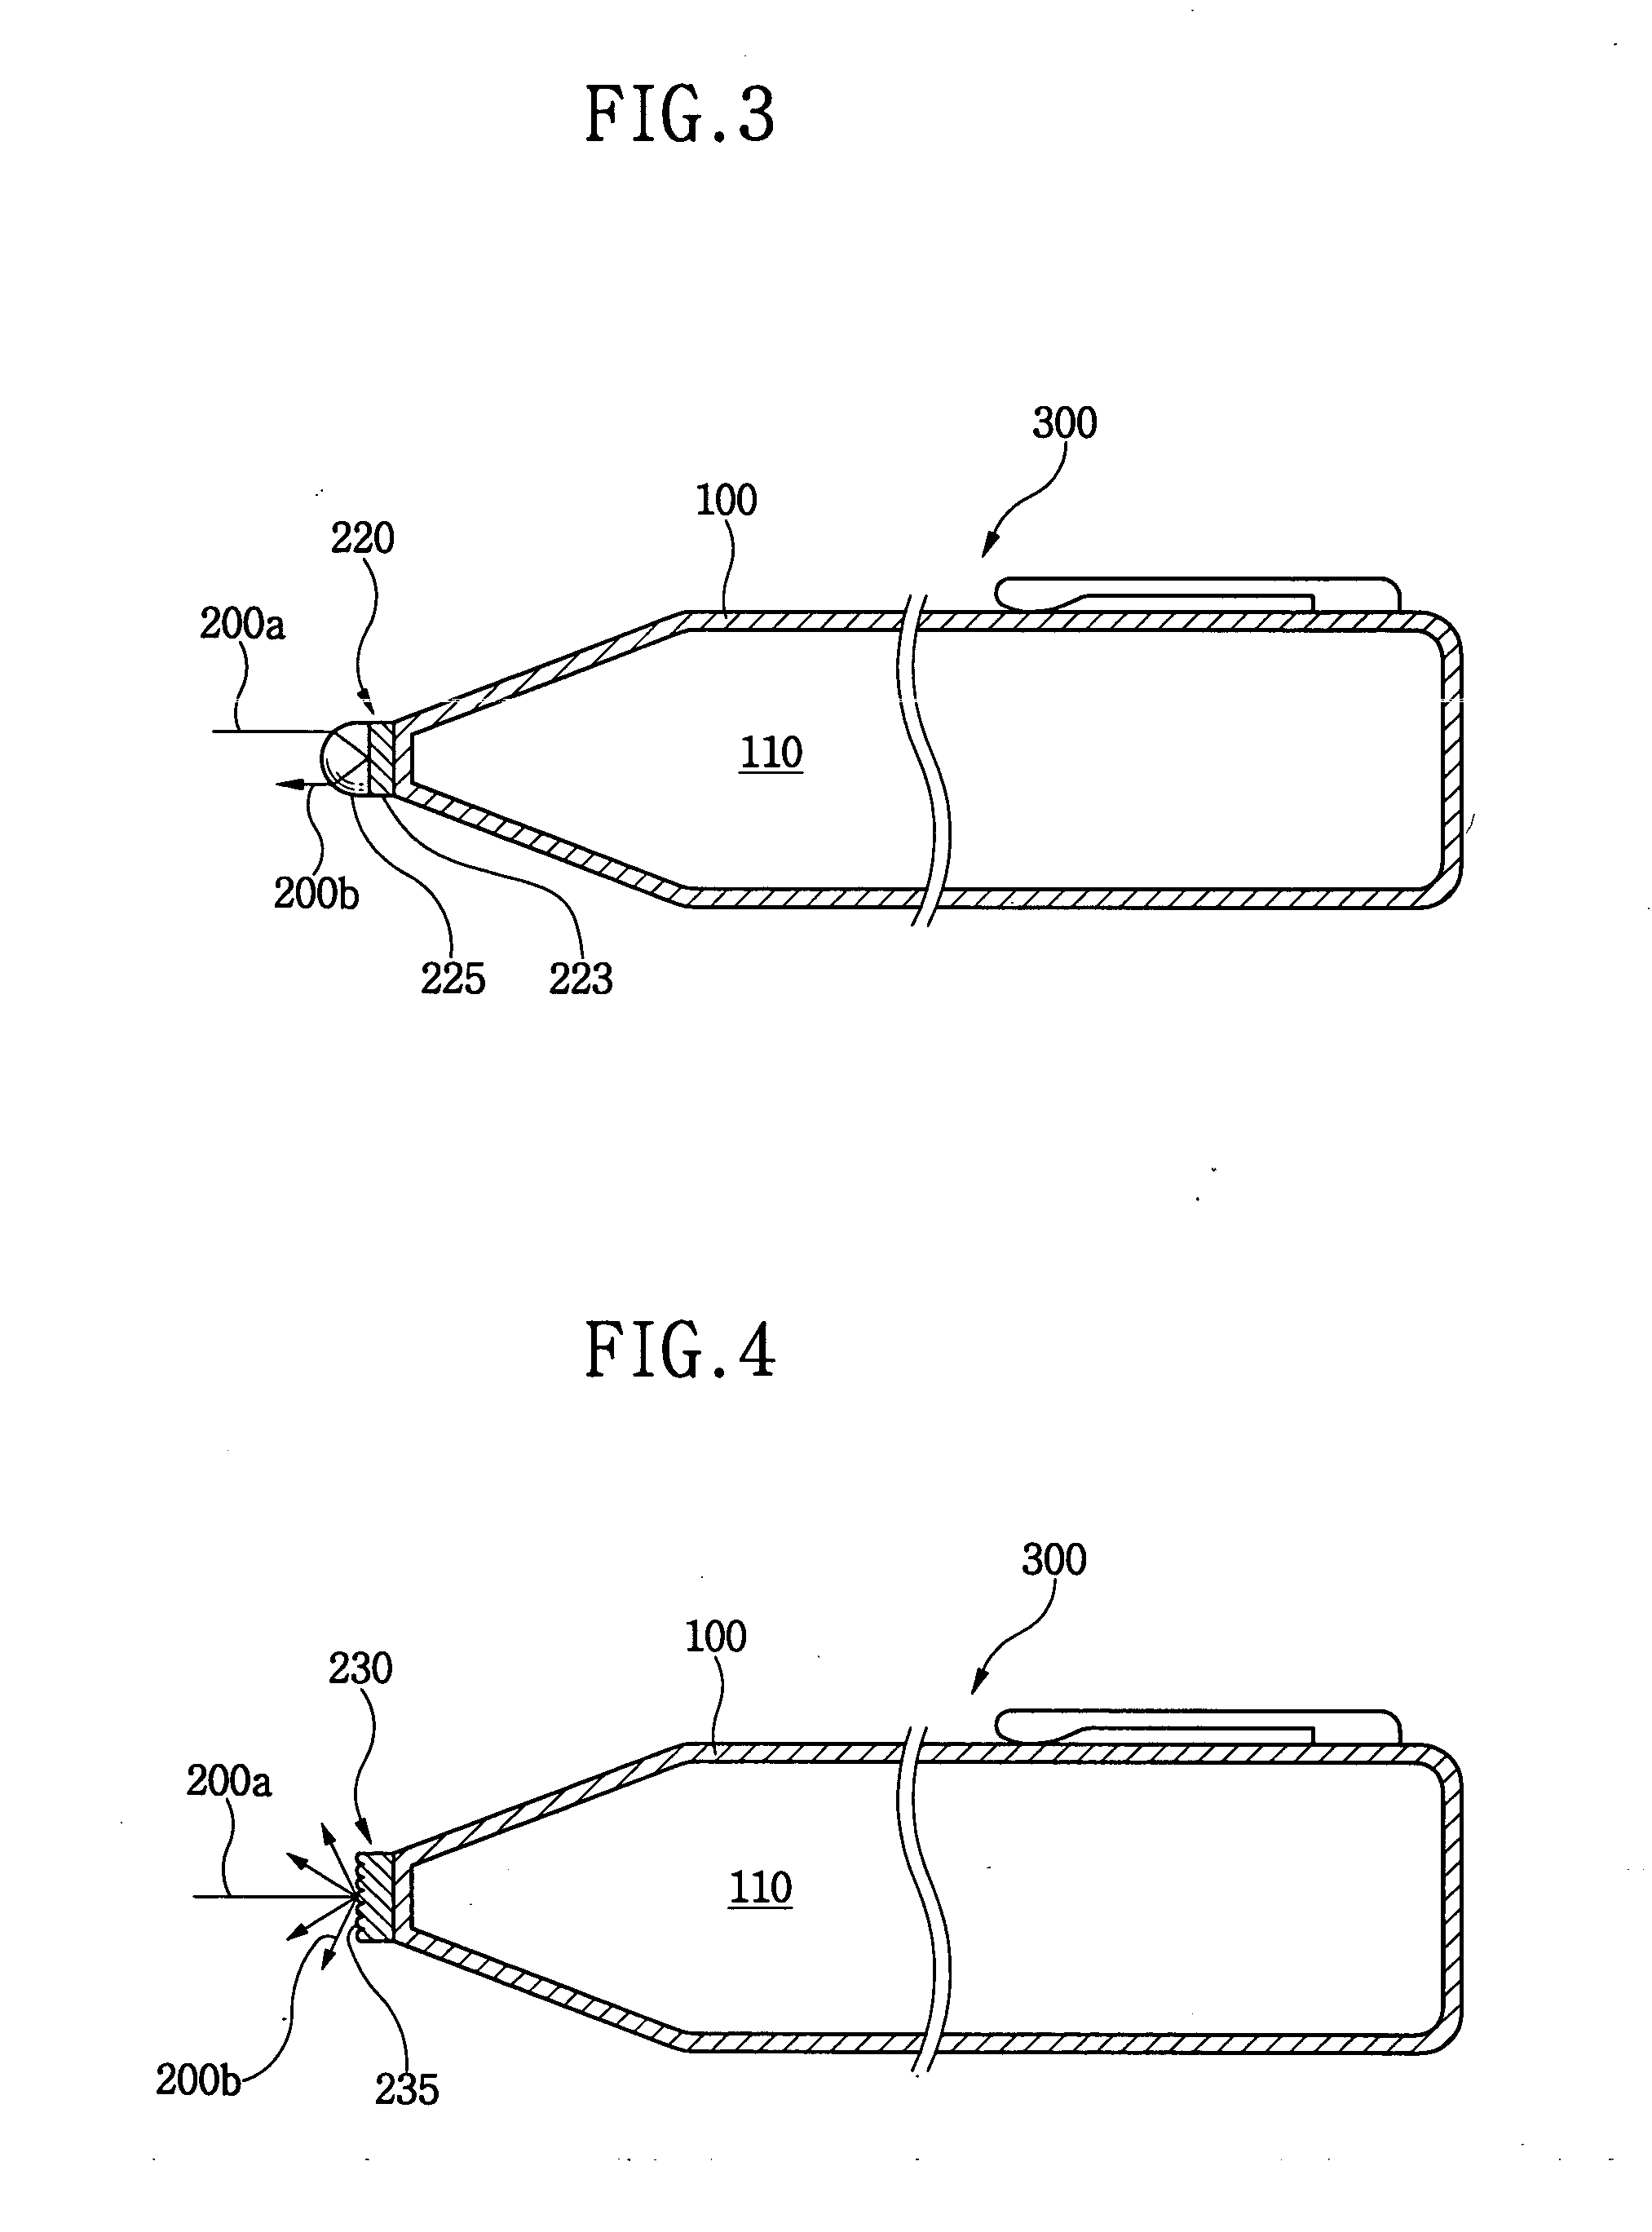 Image display system with light pen